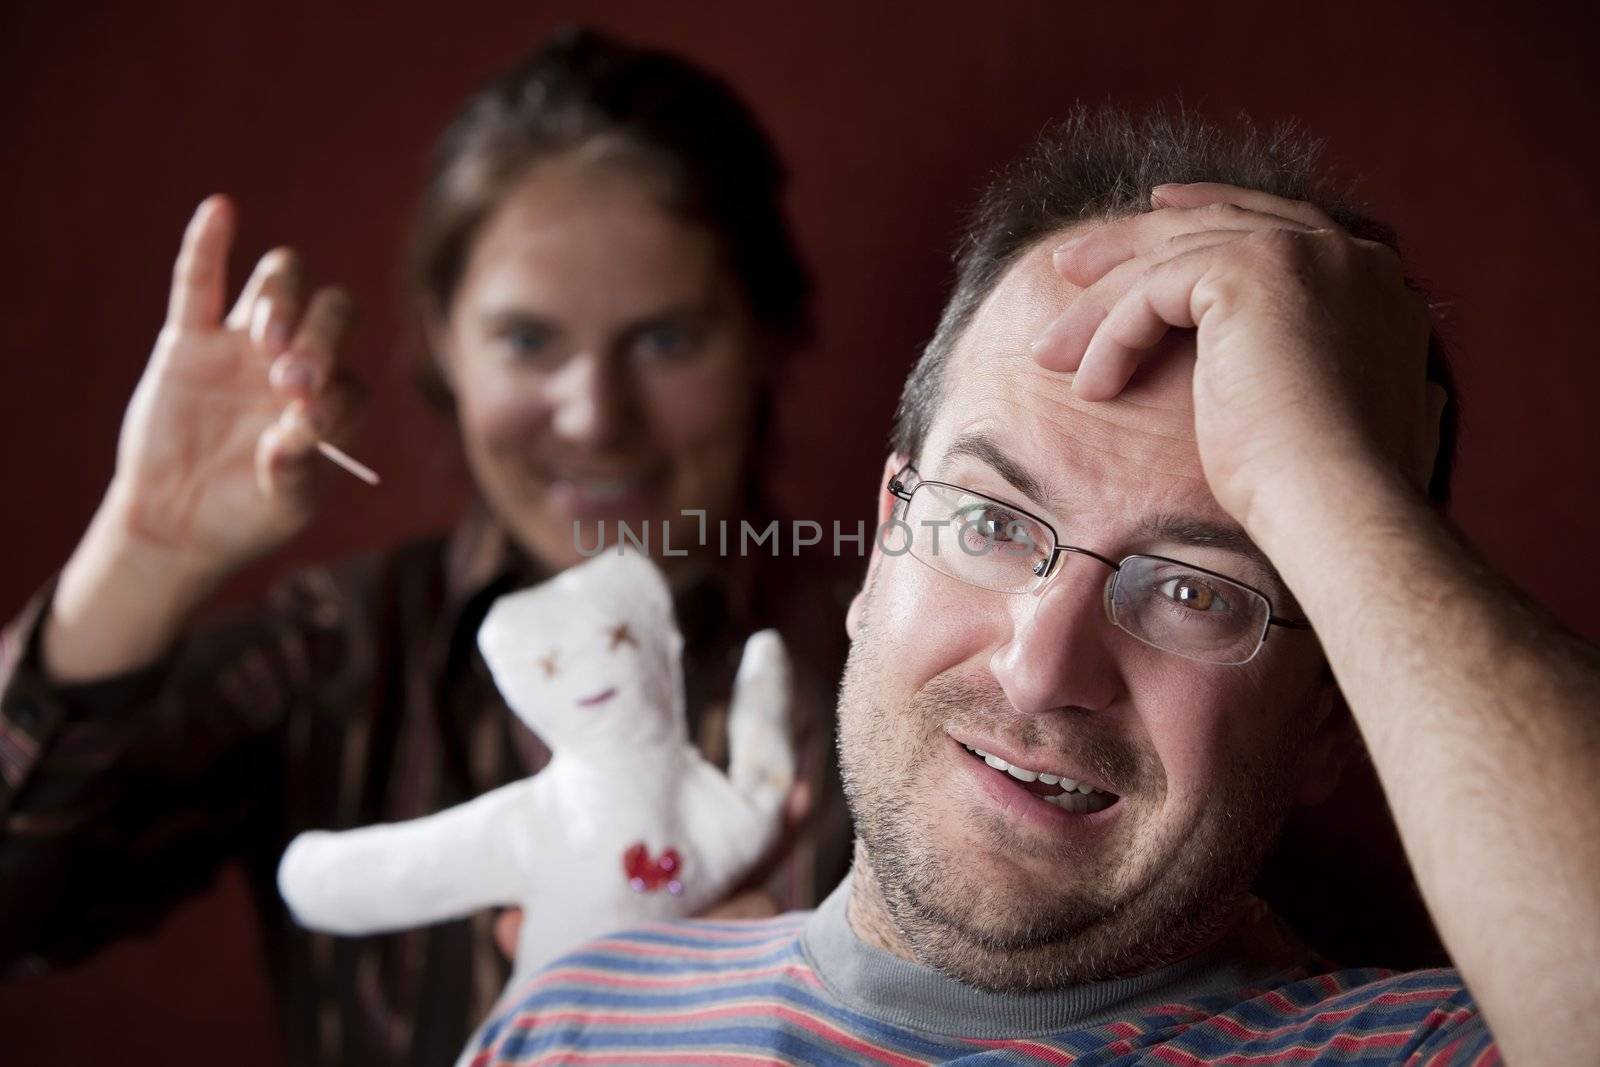 Guilty man with upset woman poking voodoo doll in the background